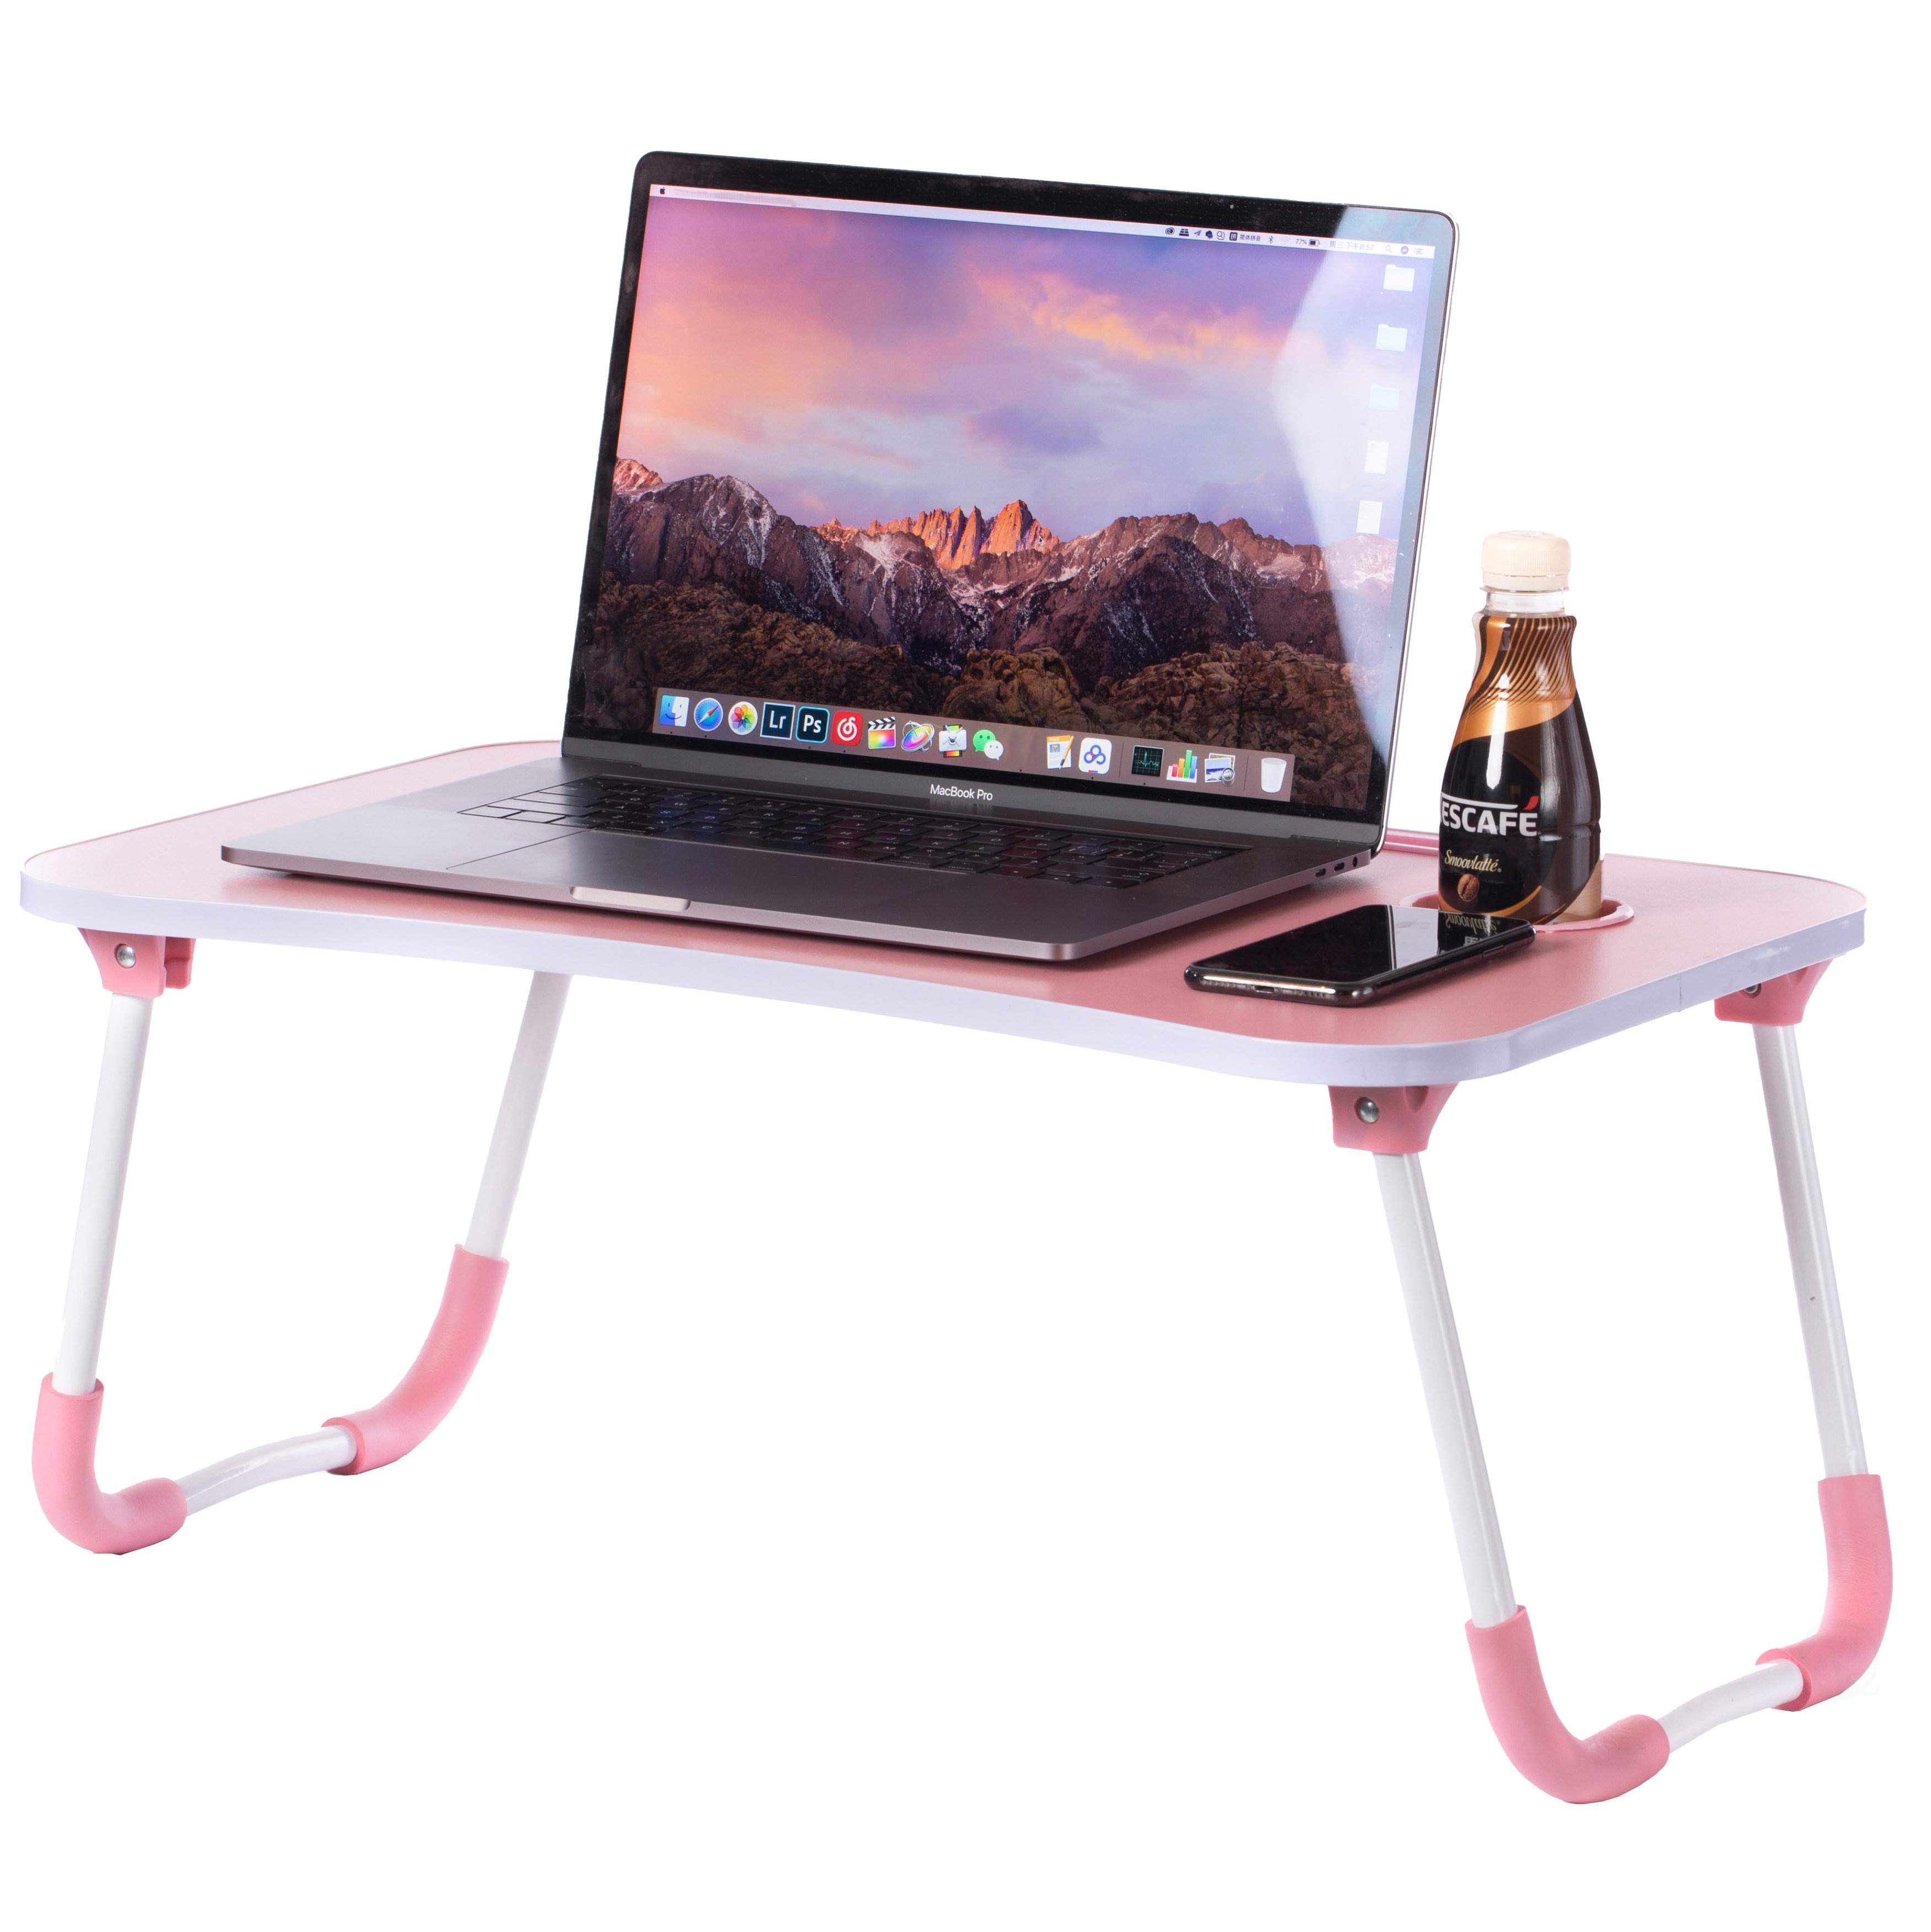 https://visualhunt.com/photos/23/bed-tray-laptop-foldable-table.jpg